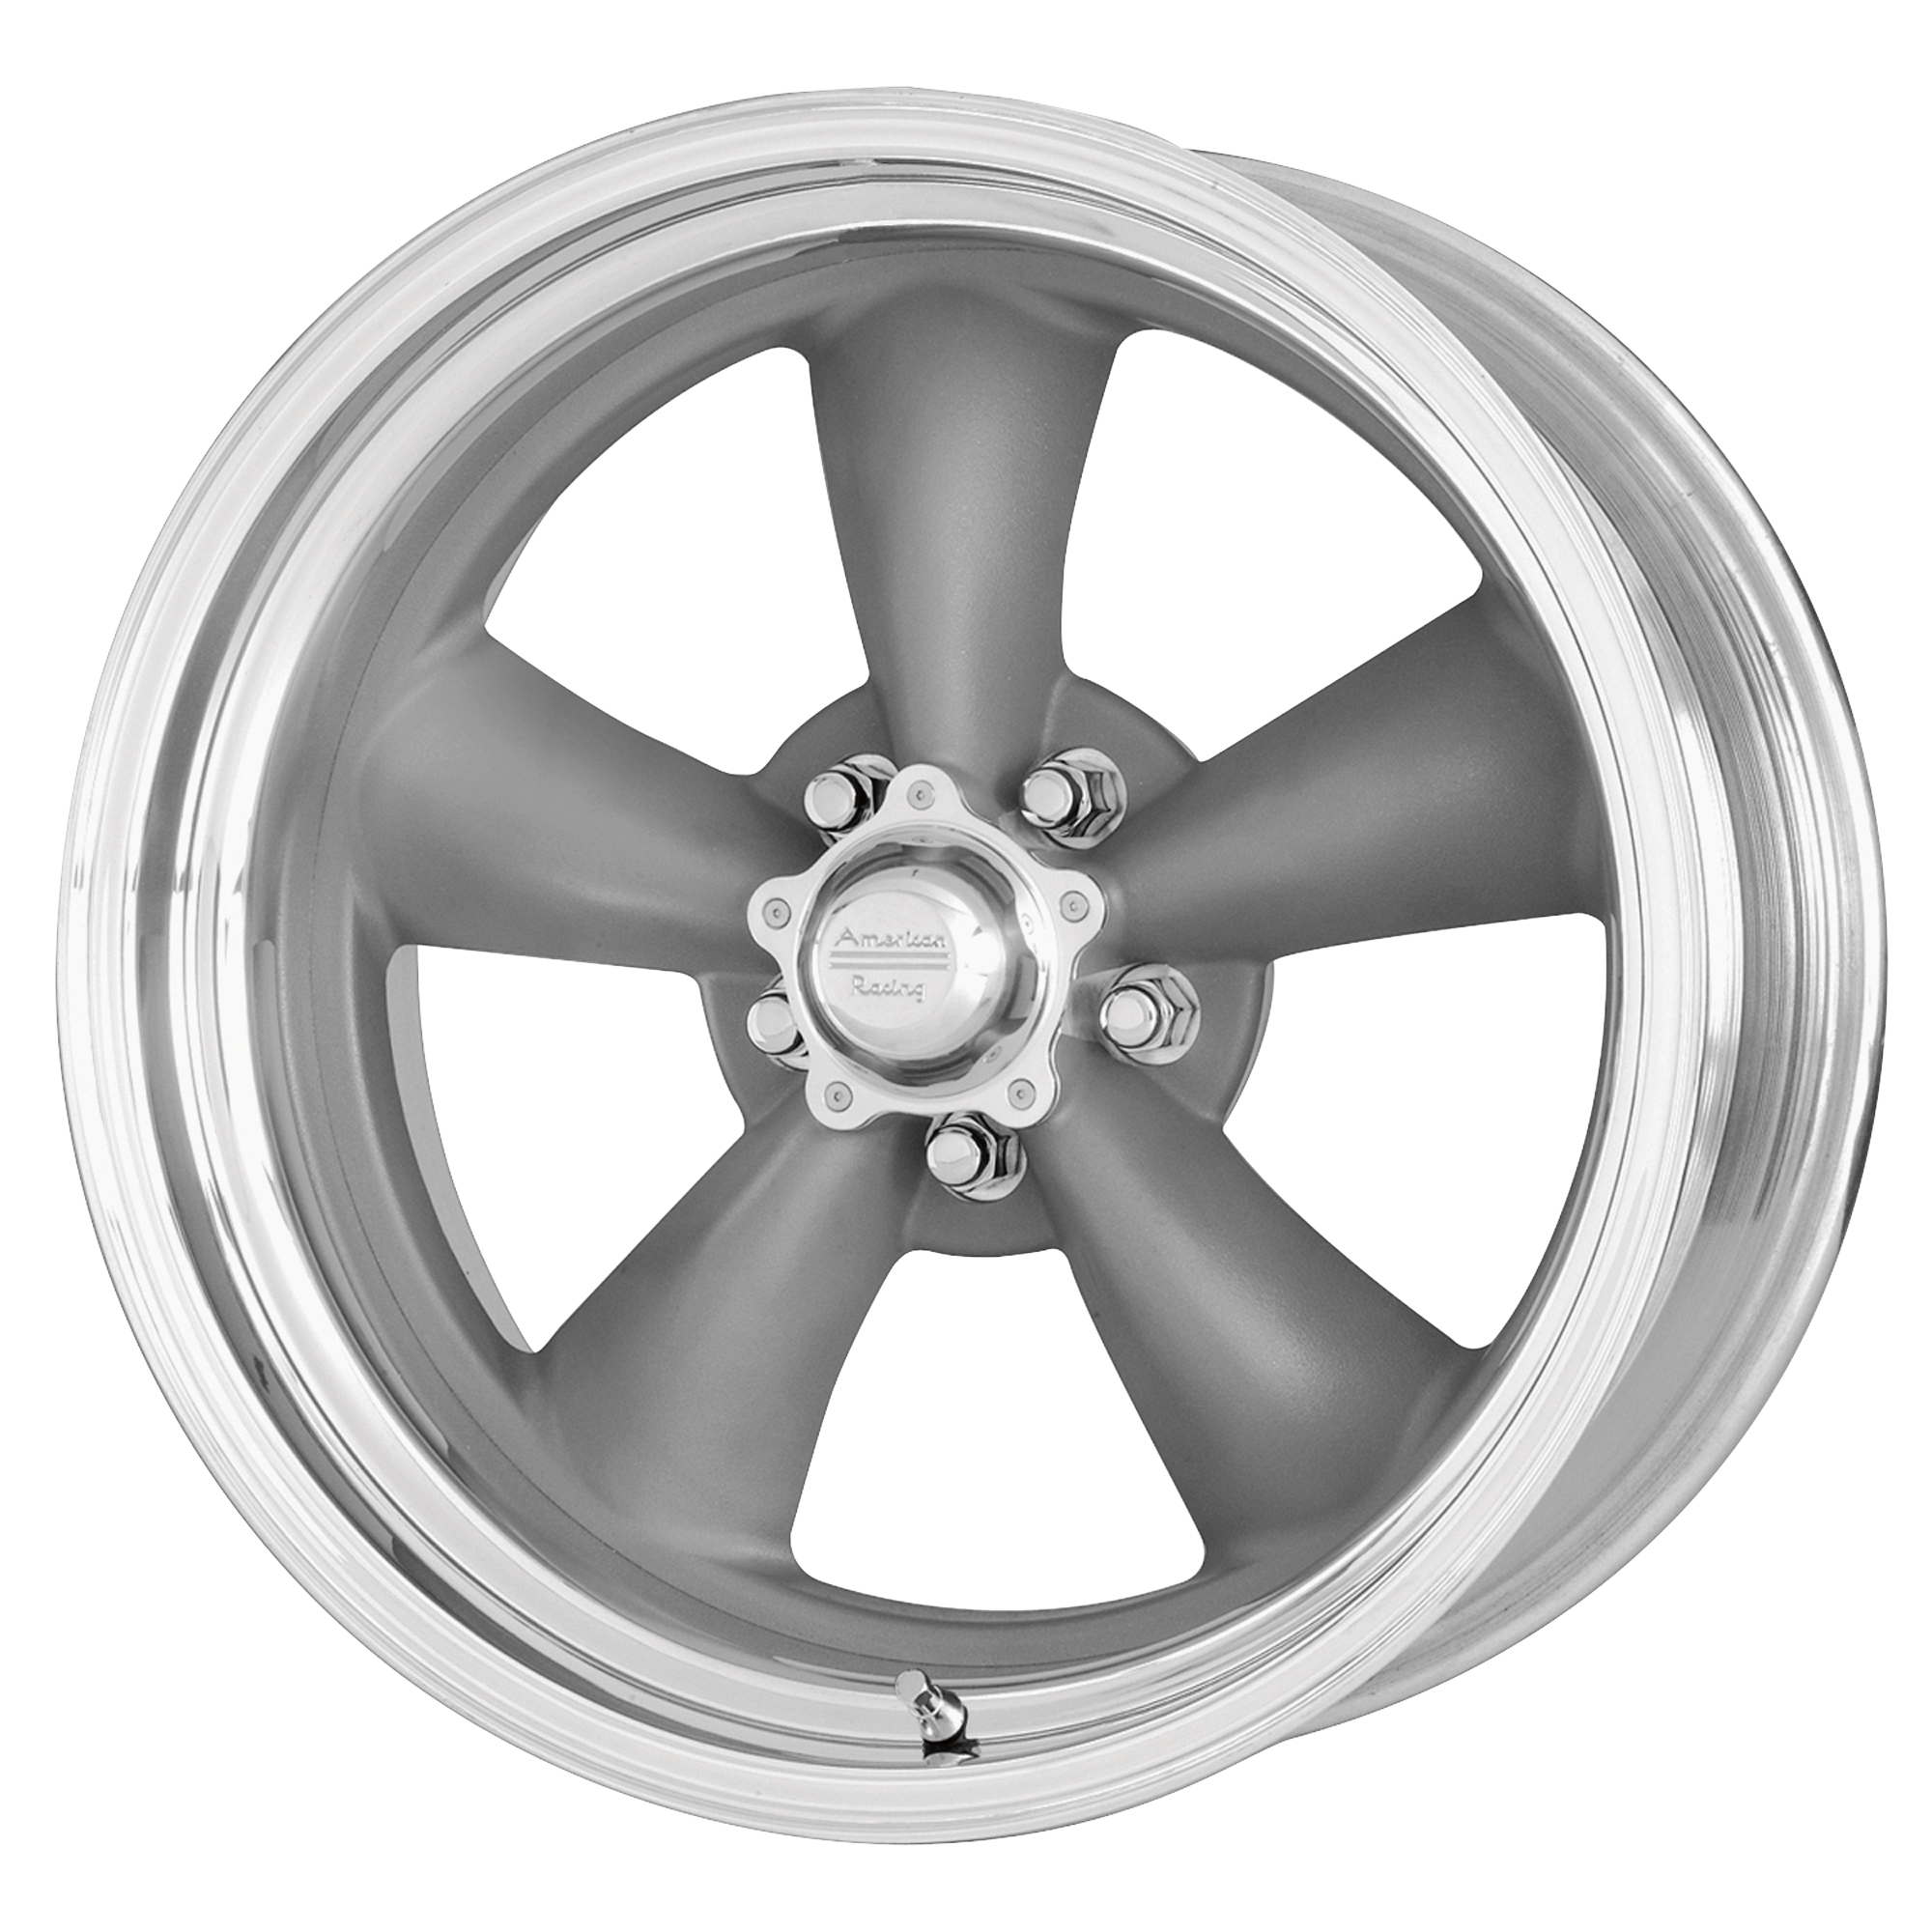 CLASSIC TORQ THRUST II ONE PIECE 18x8 5x120.65 MAG GRAY W/ MACHINED LIP (0 mm) - Tires and Engine Performance